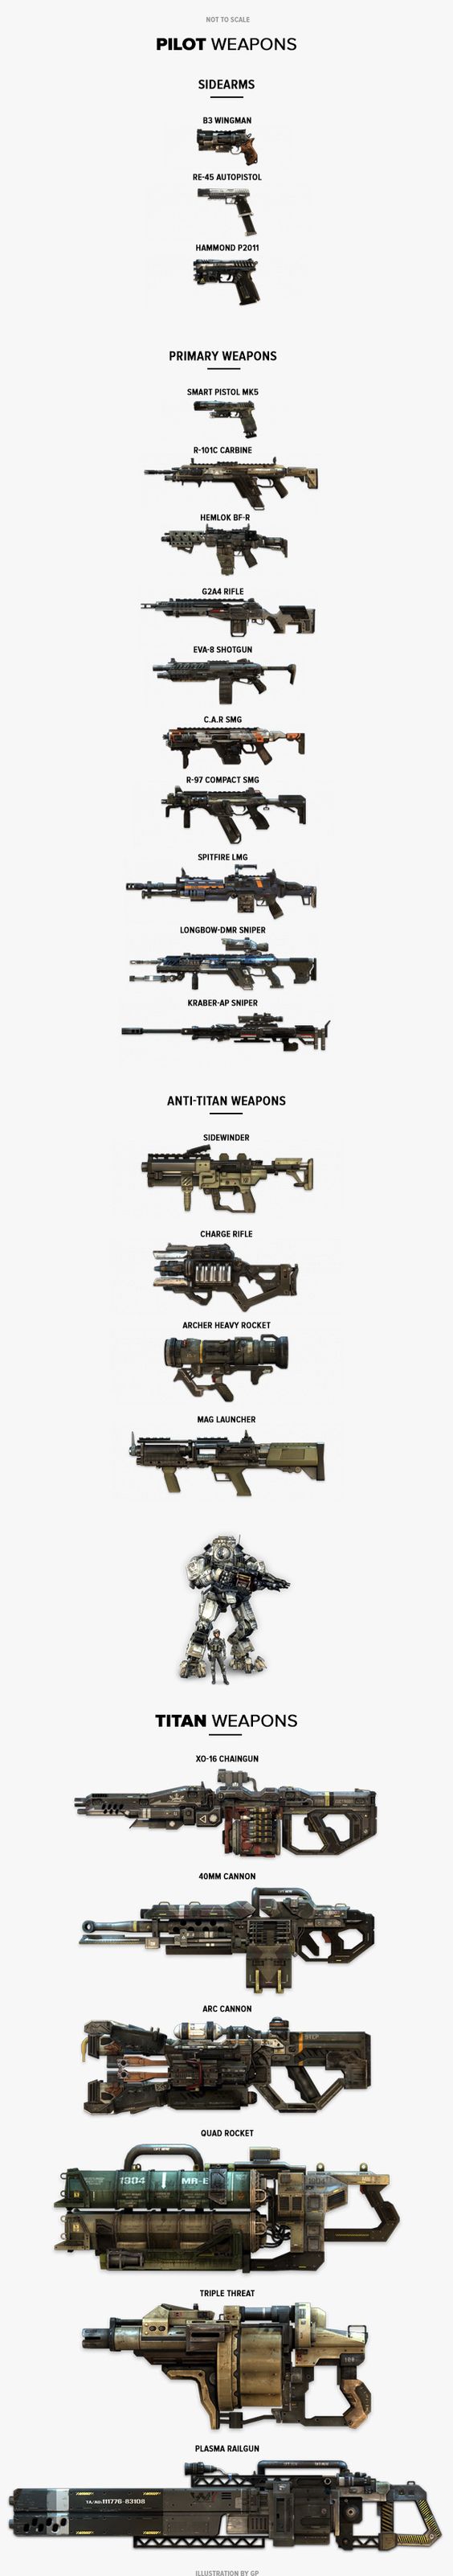 titanfall weapons